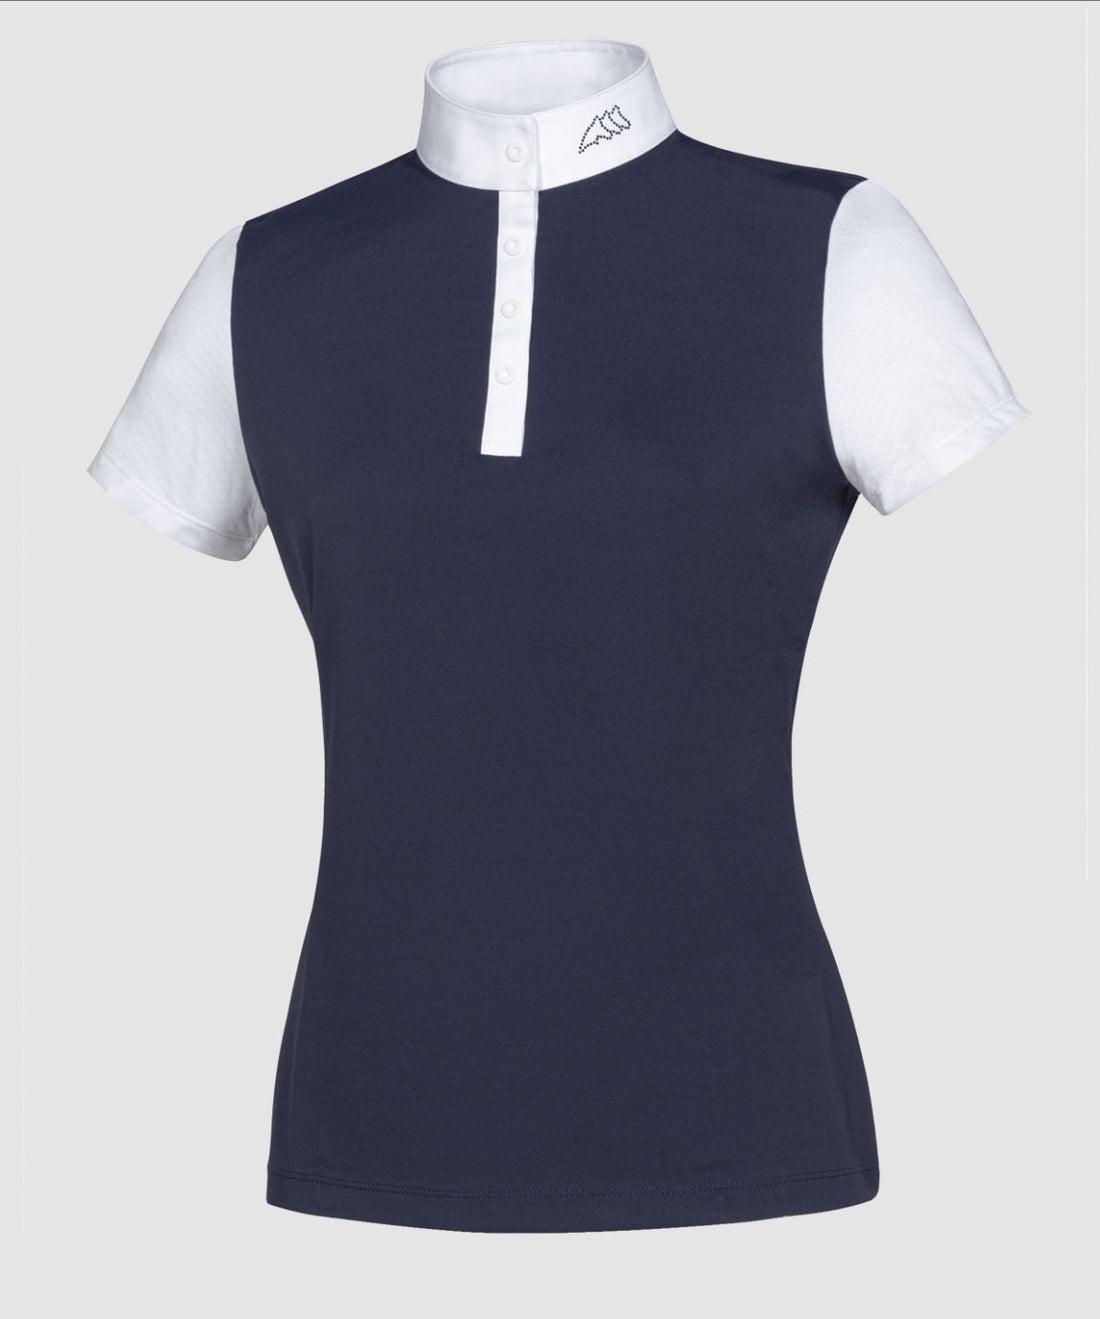 Equiline Blue Esdie Womens Short Sleeve Competition Polo Shirt